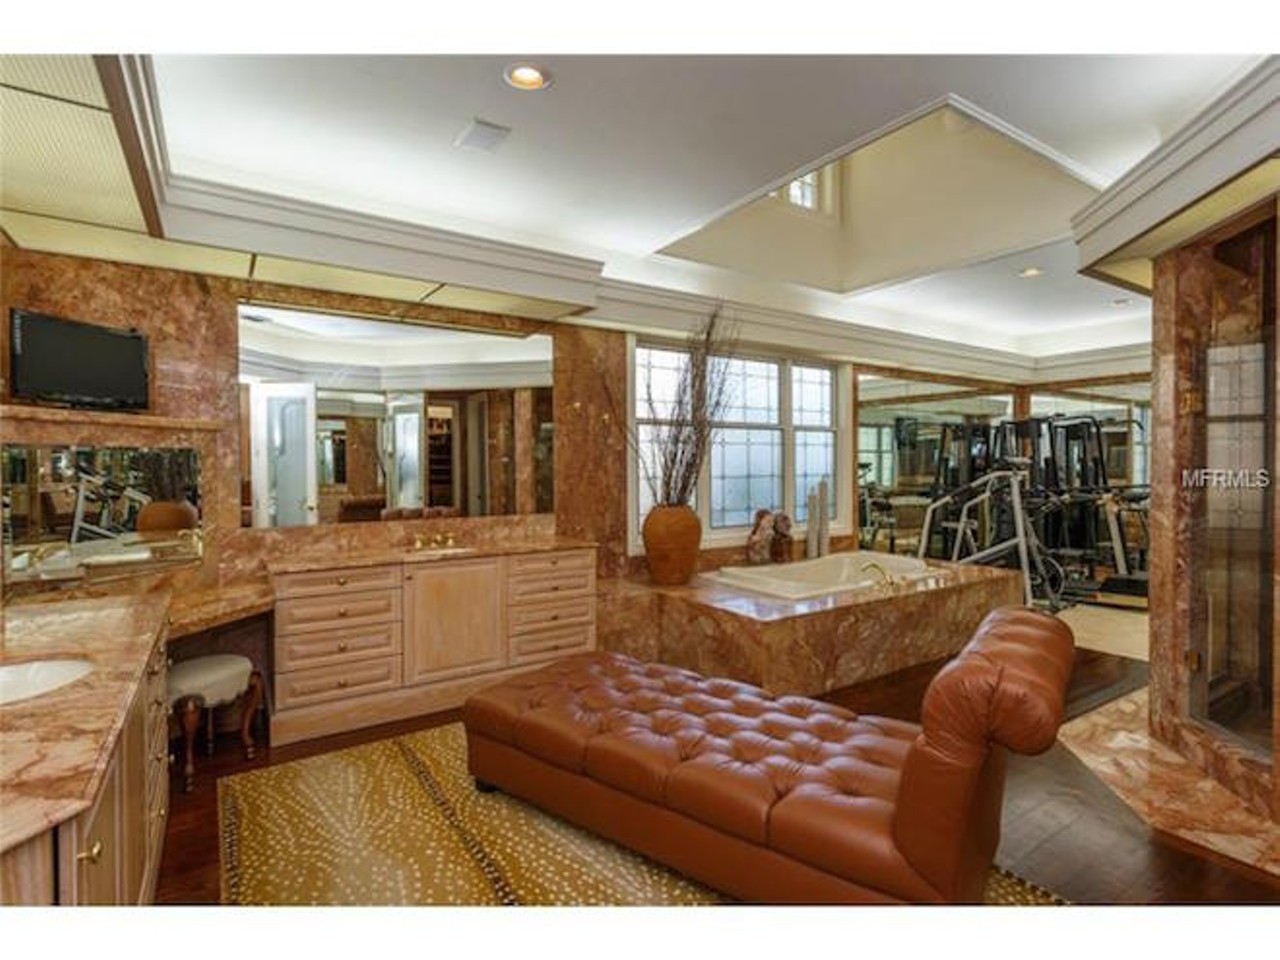 One of the bathrooms appears to have its own workout room, as well as a fainting couch.